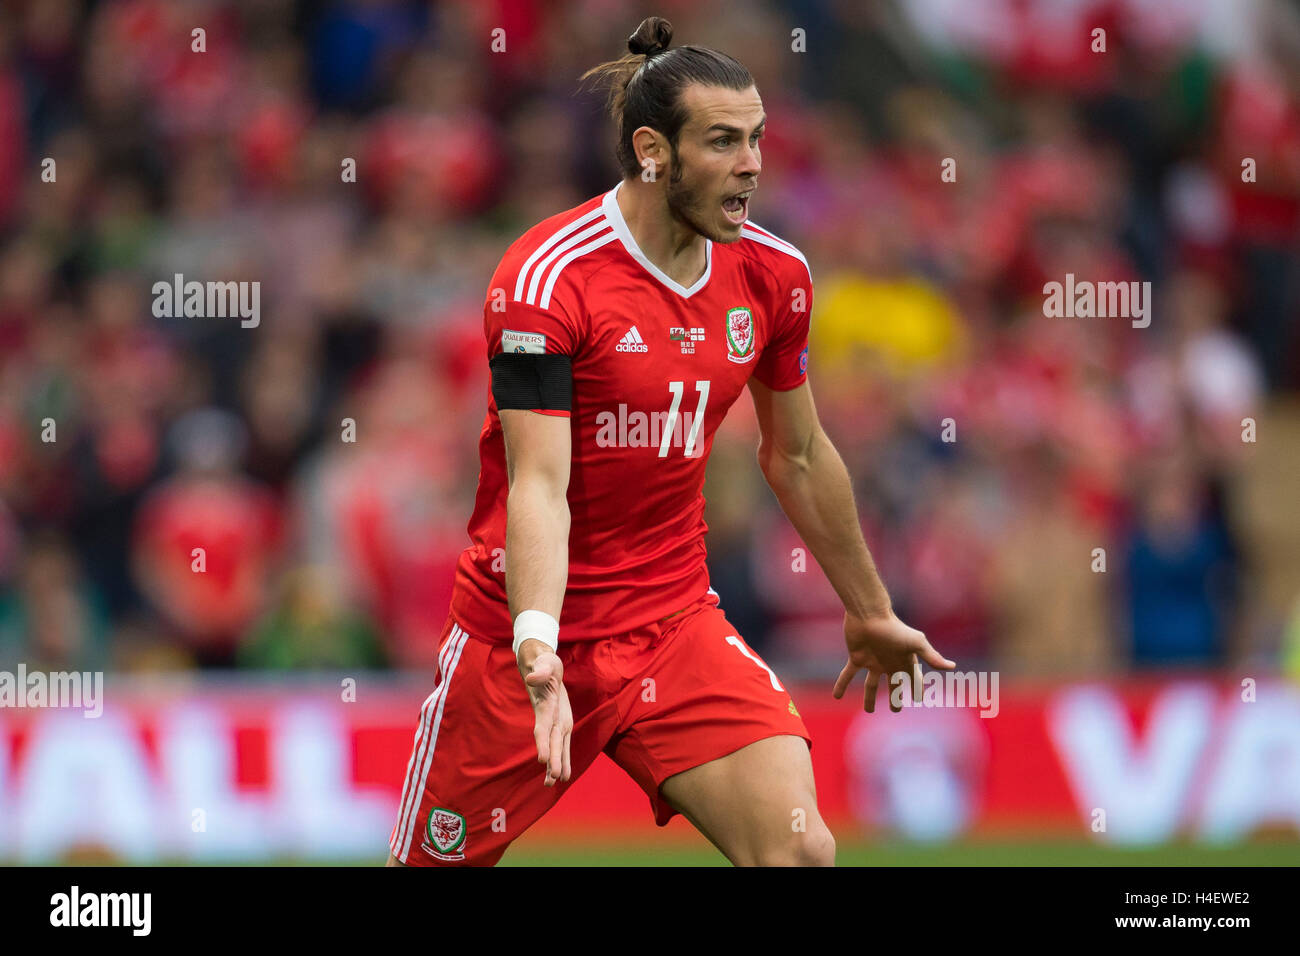 Gareth Bale in action for Wales football team. Stock Photo